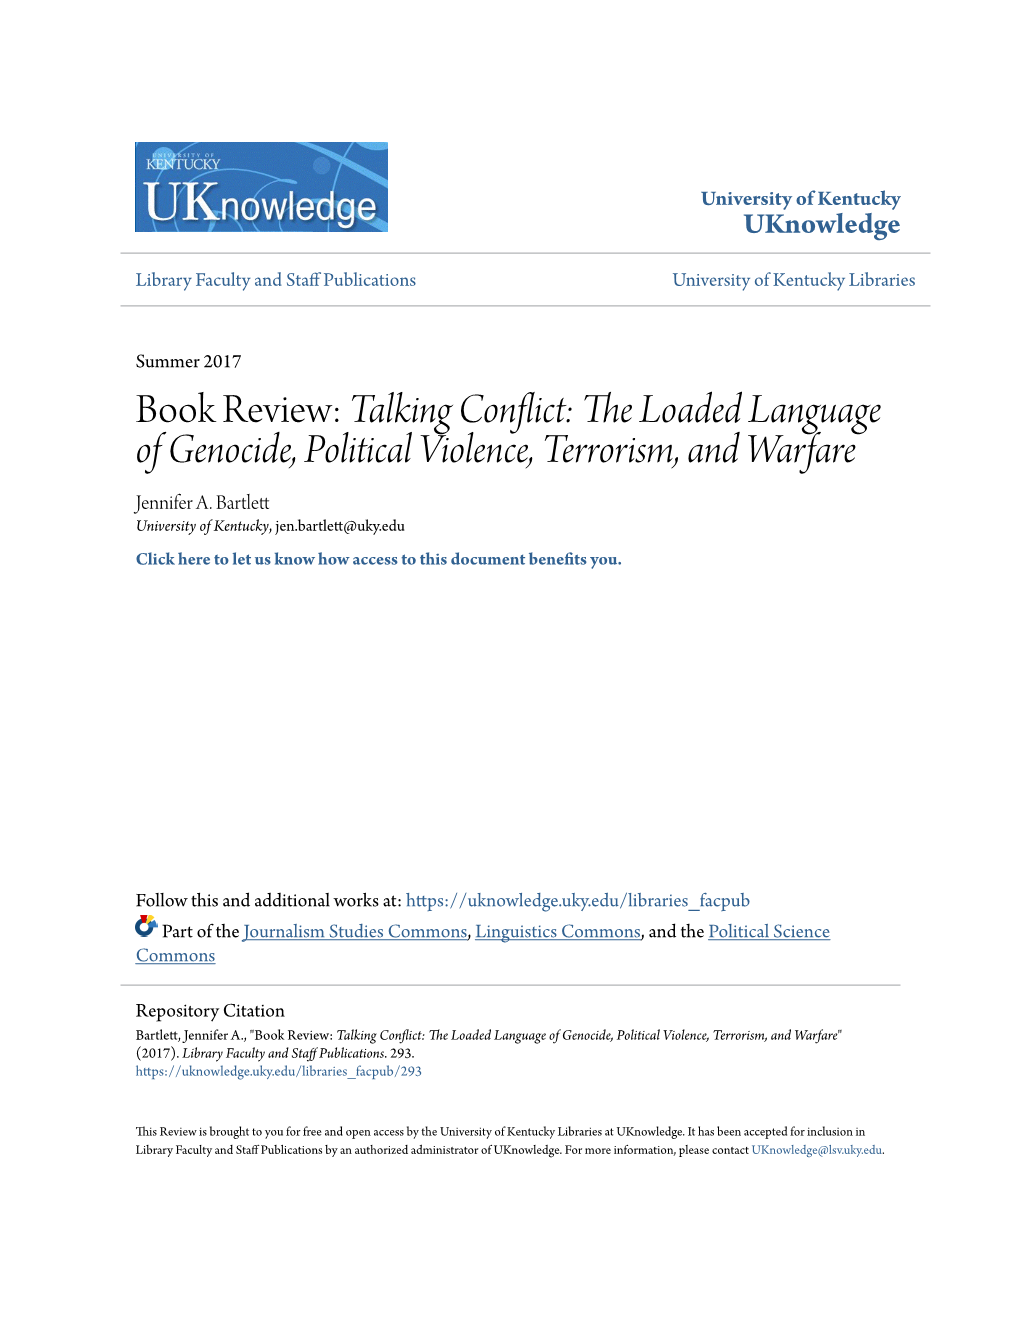 Book Review: &lt;Em&gt;Talking Conflict: the Loaded Language of Genocide